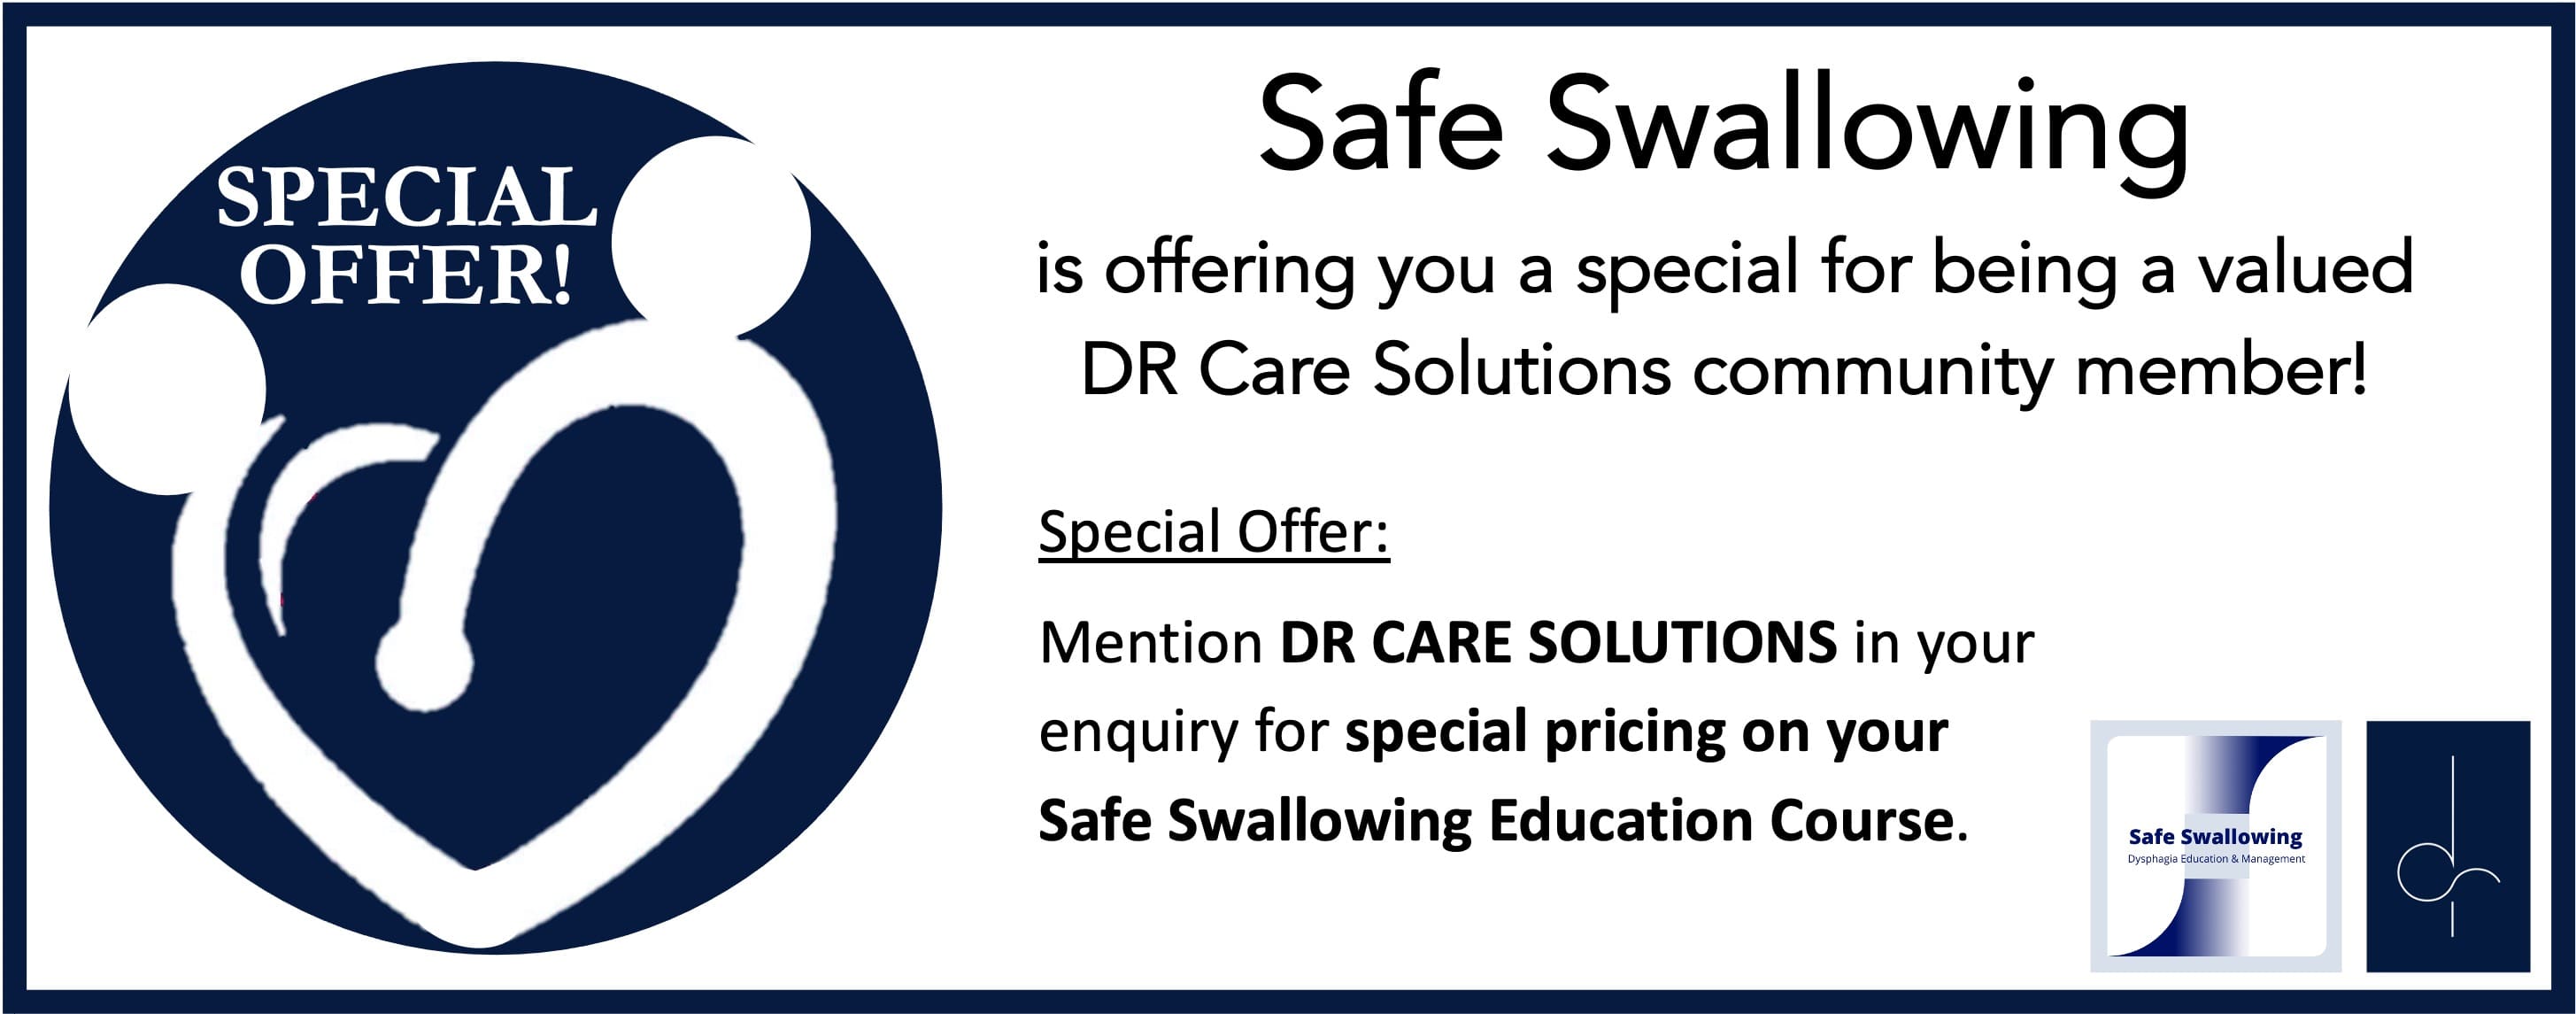 Safe Swallowing - Special Offer